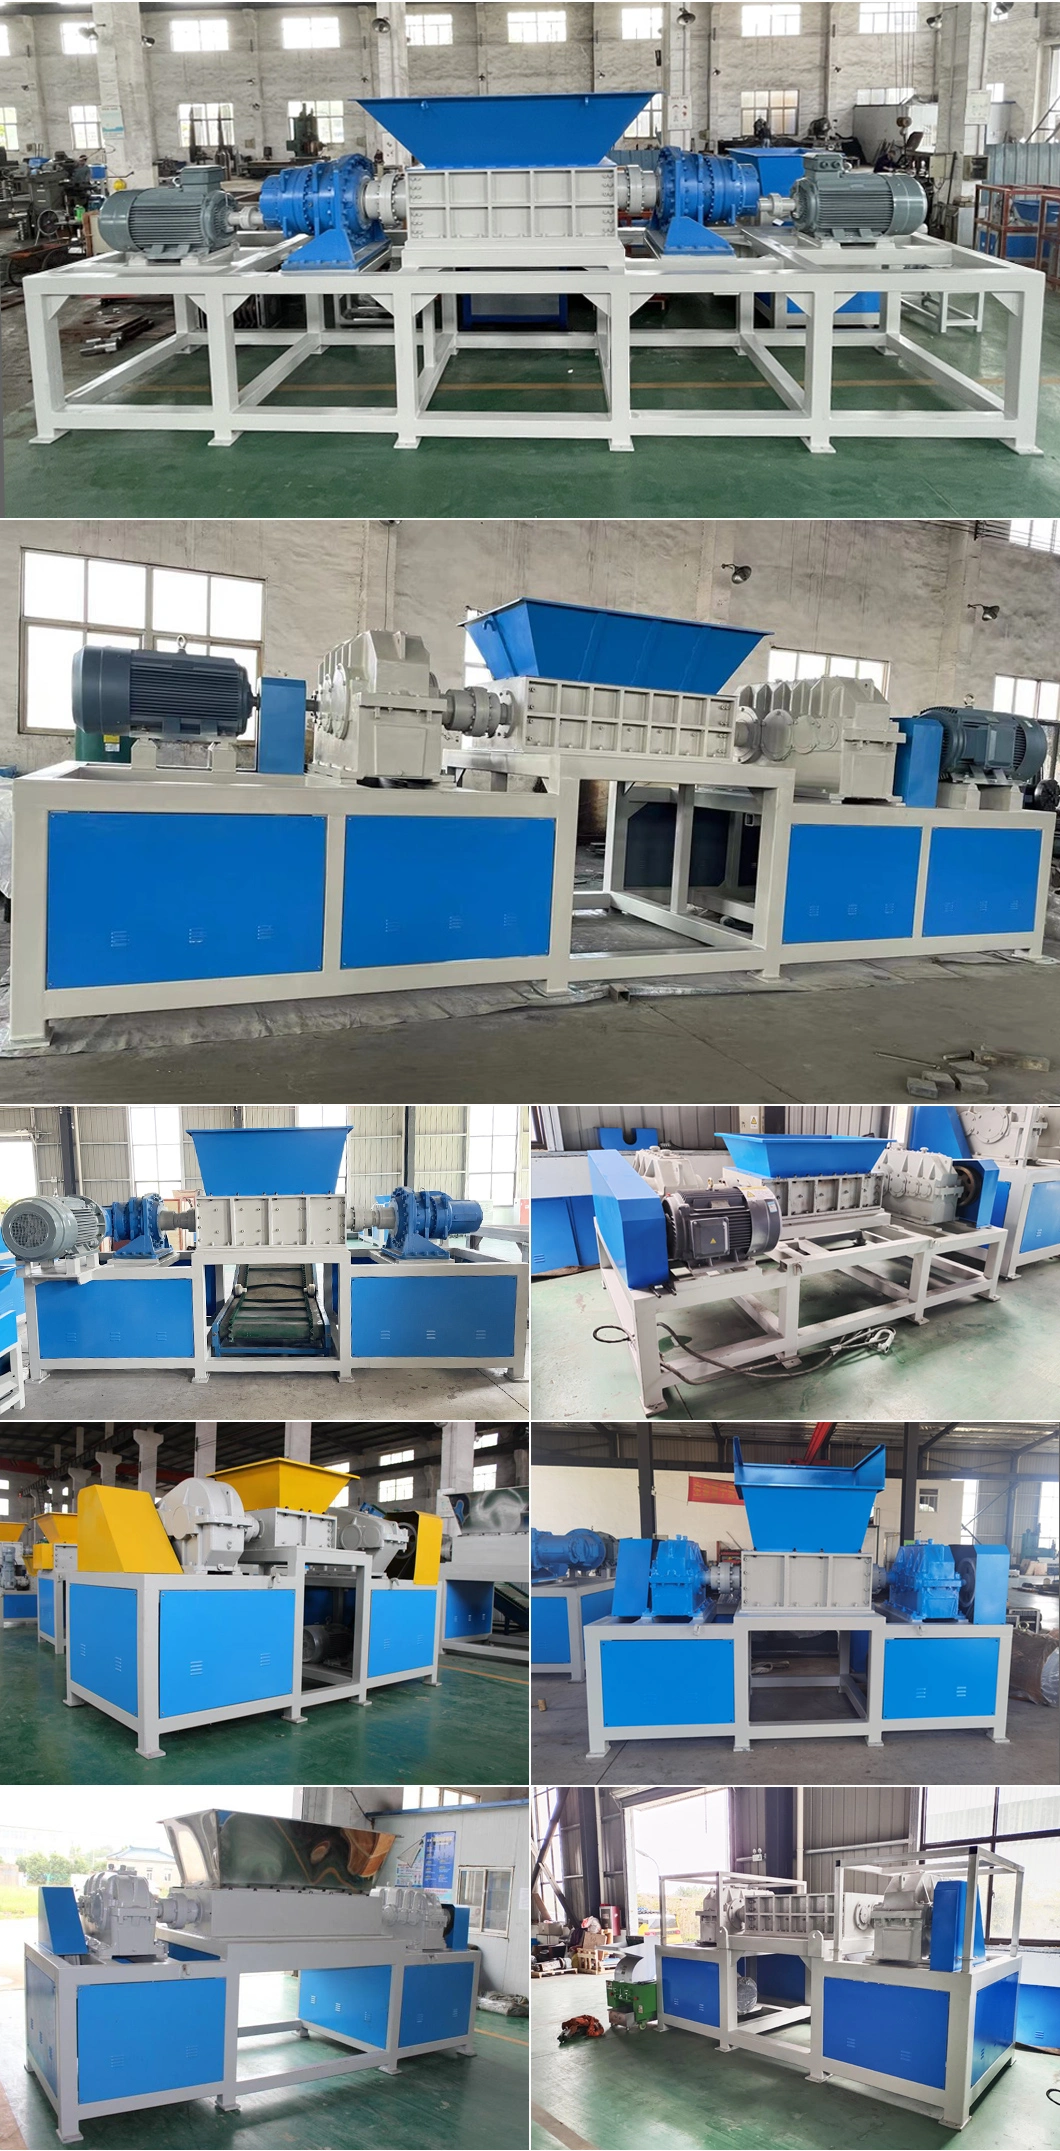 Custom Size Organic Waste Home Compost Horse Manure Chicken Pig Animal Waste Dead Animal Body Carcass Recycling Shredder Conveyor Production Line Crusher System